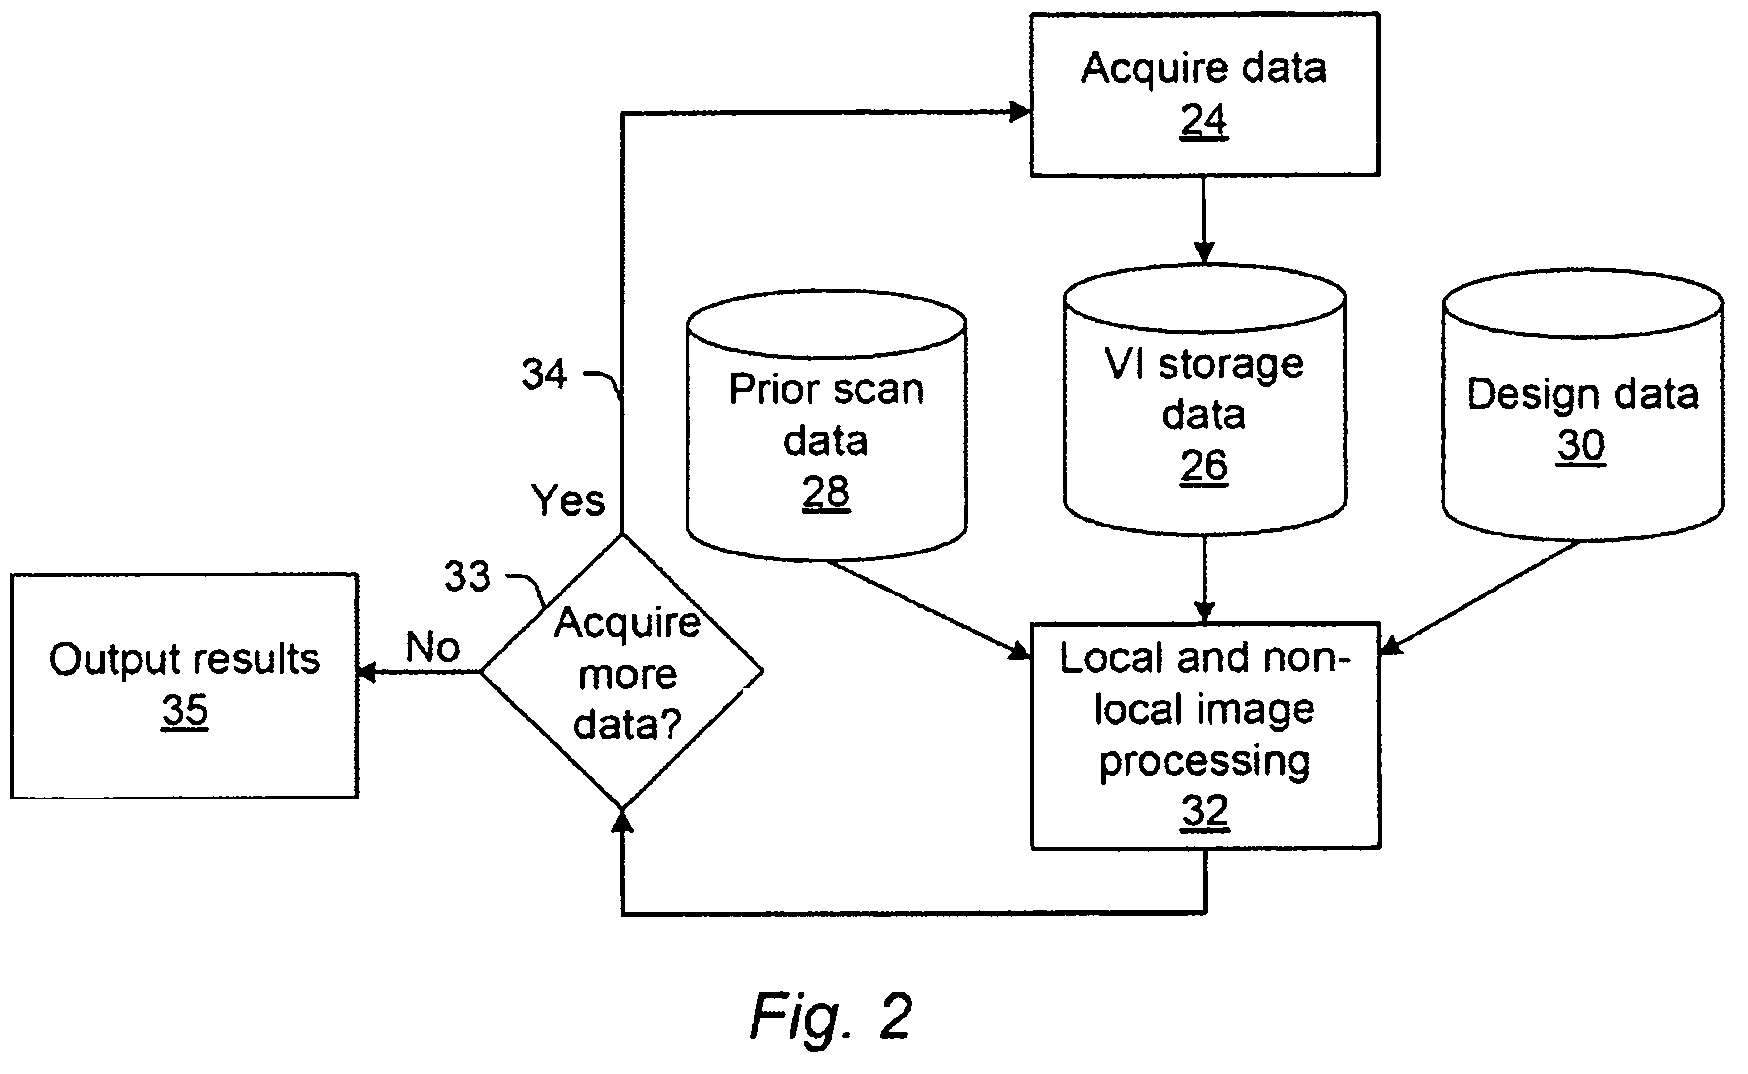 Systems and methods for creating persistent data for a wafer and for using persistent data for inspection-related functions